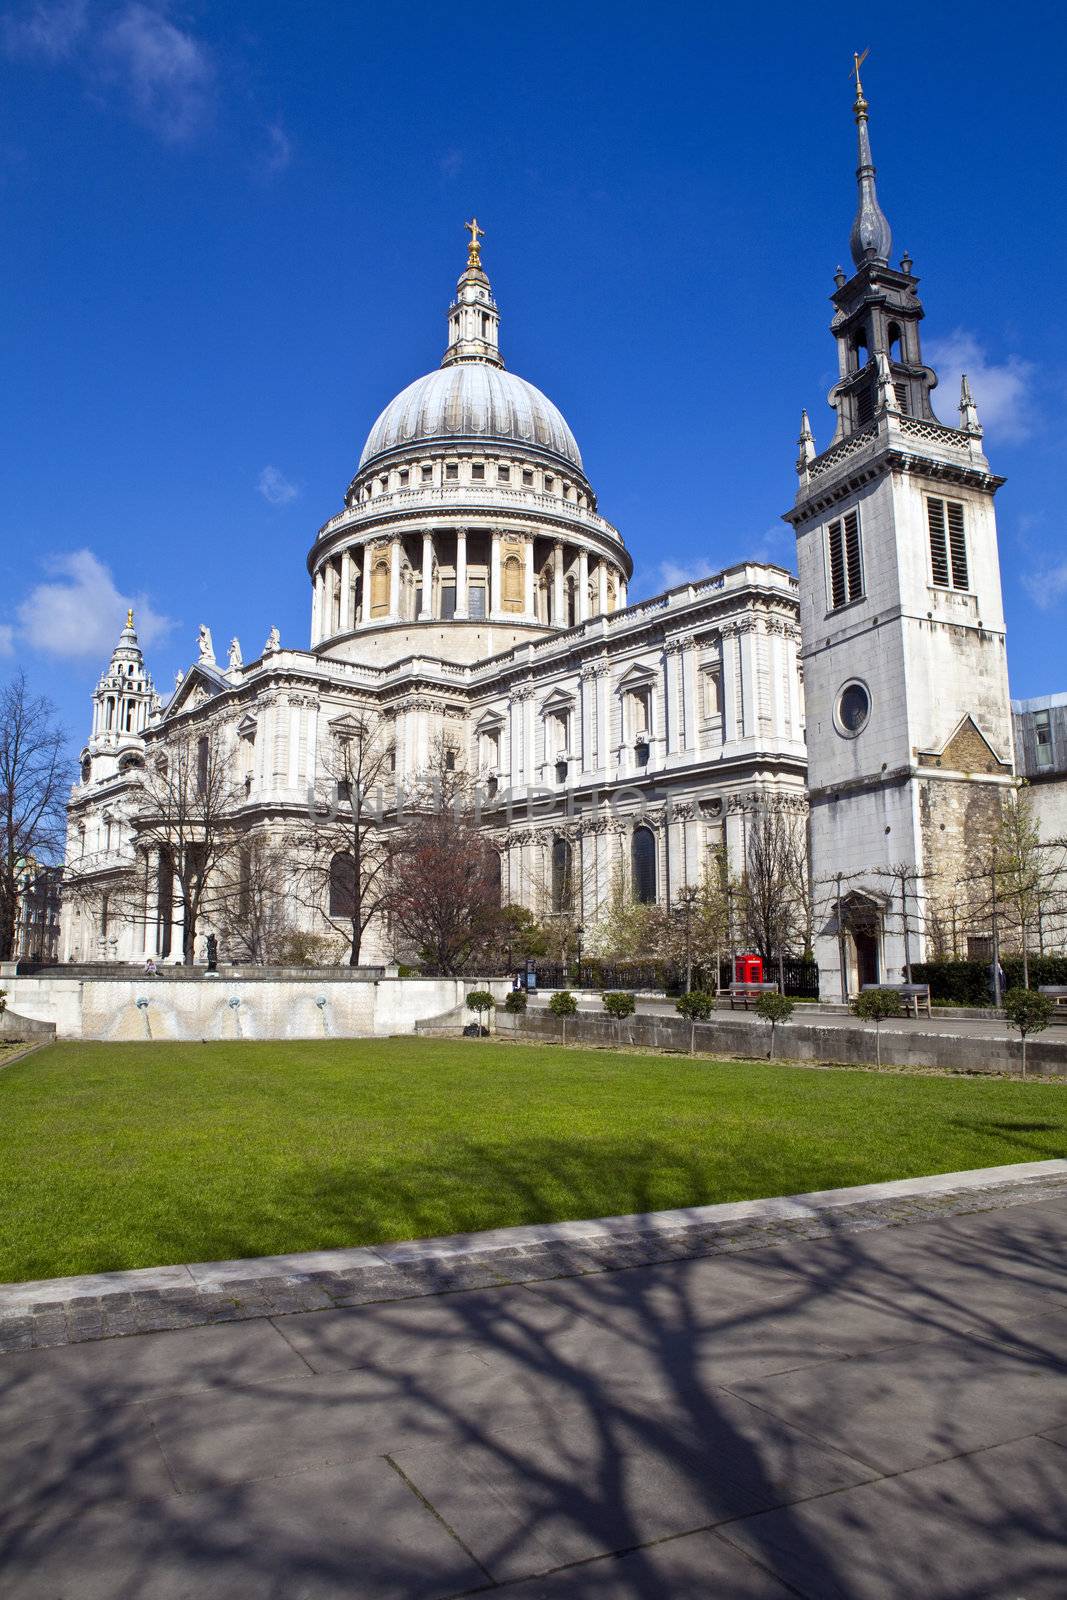 St. Paul's Cathedral and the Tower of St. Augustine Church (now the St. Paul's Cathedral Choir School) in London.